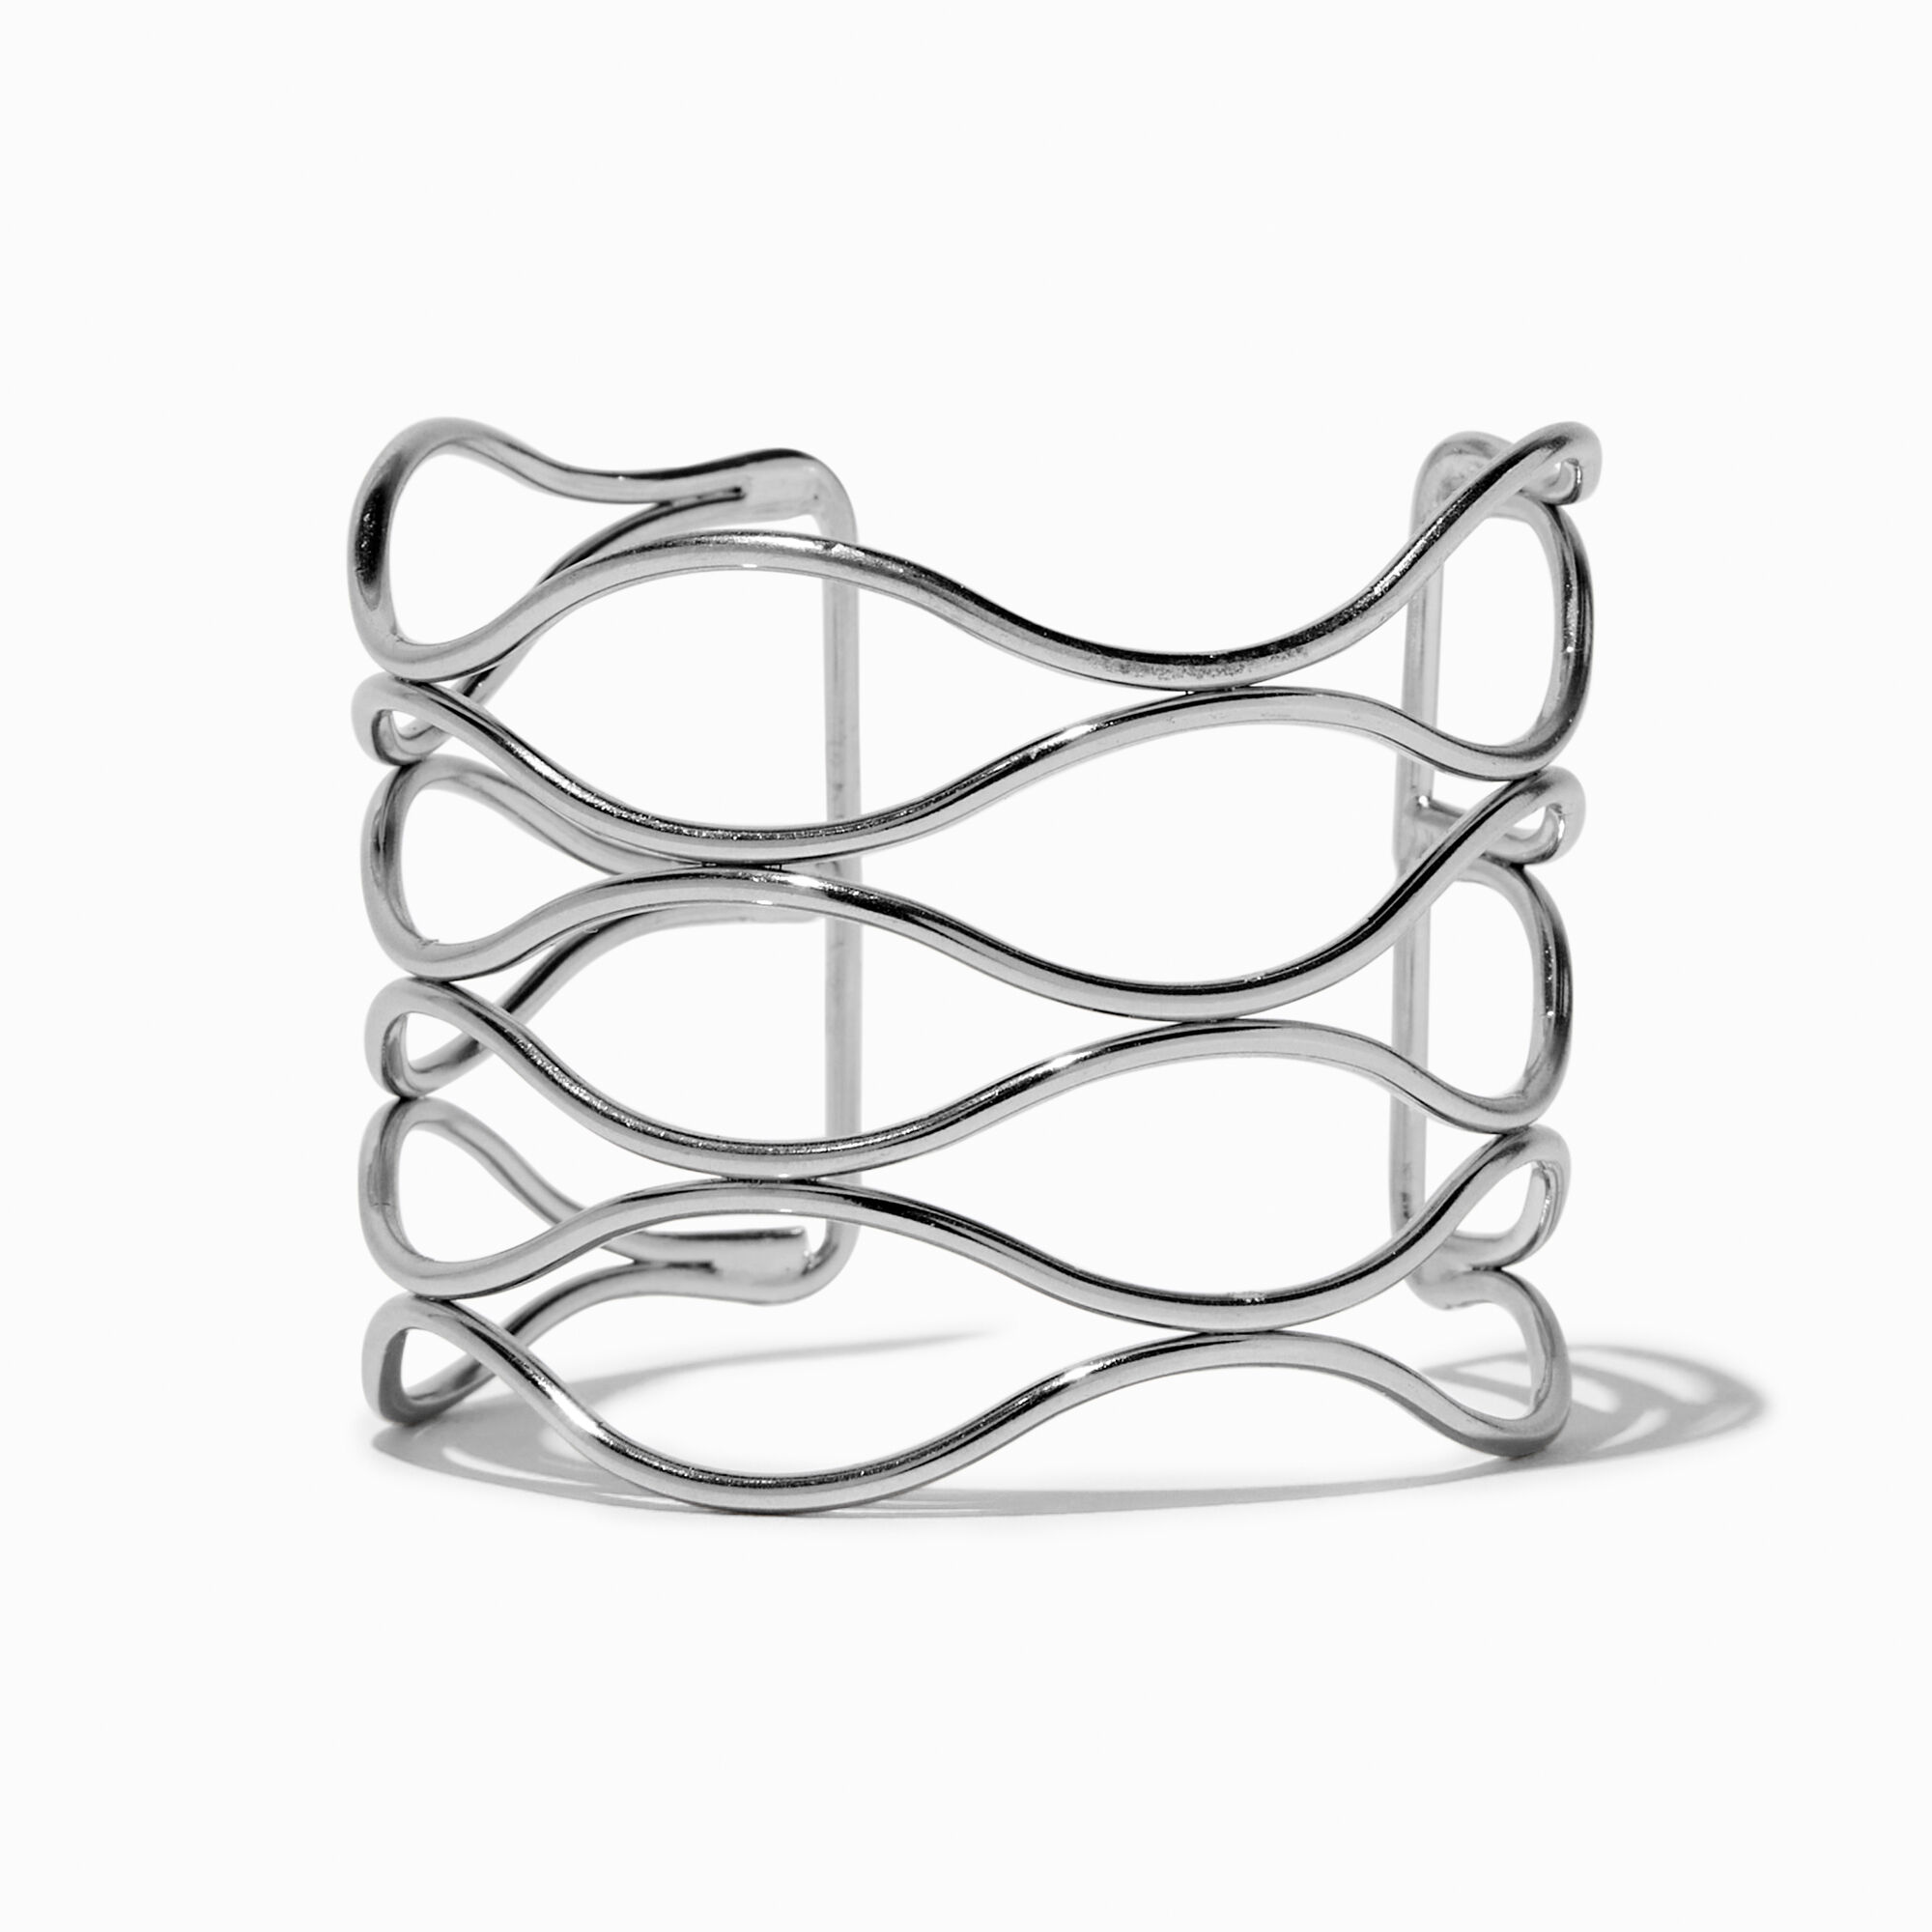 View Claires Tone Rigid Wiggle Cuff Bracelet Silver information